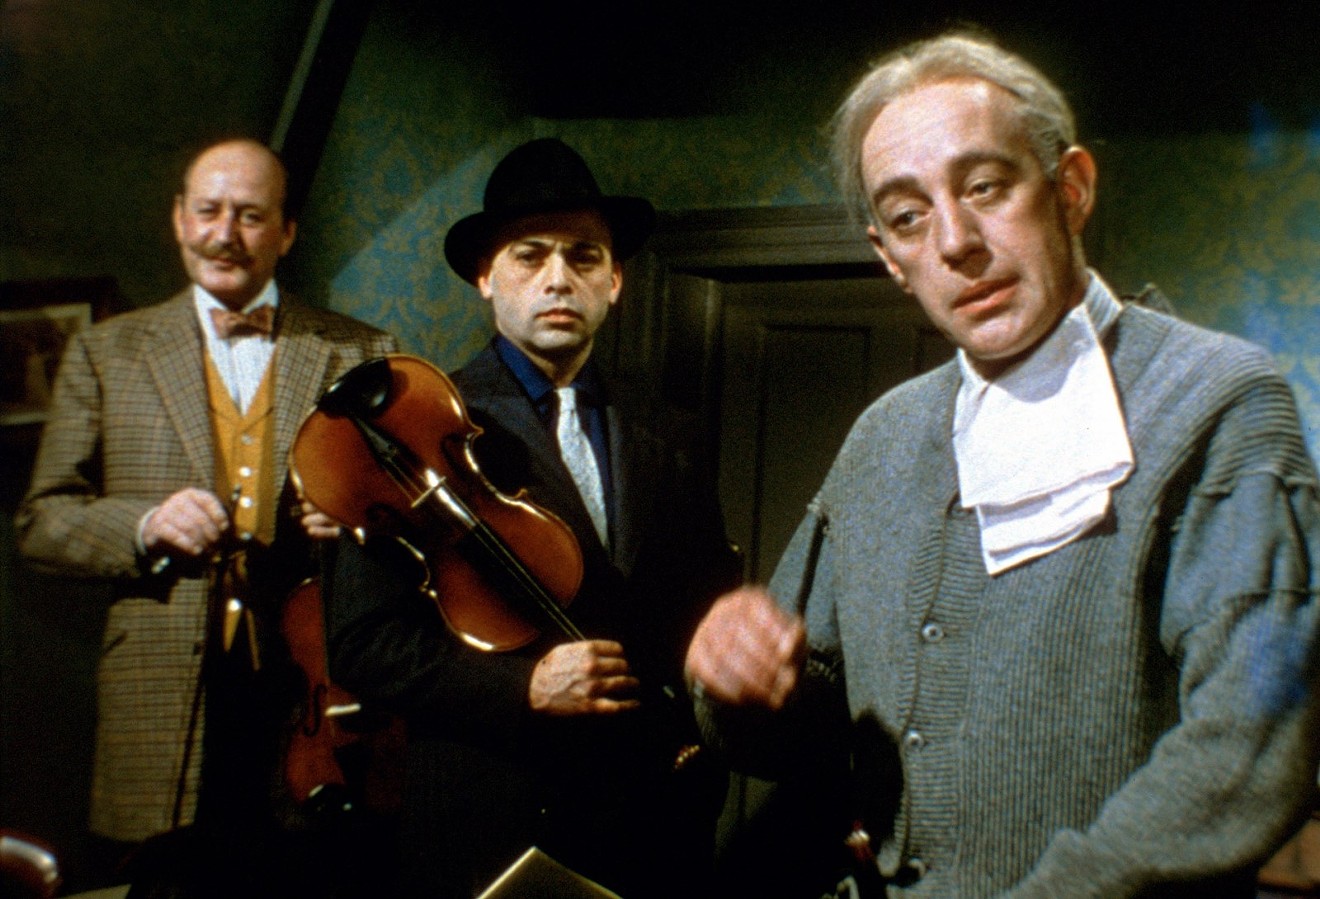 The Ladykillers screens at 7 p.m. July 21 at the Museum of Fine Arts, Houston, part of this summer's Alec Guinness: An Actor for All Seasons film spotlight.